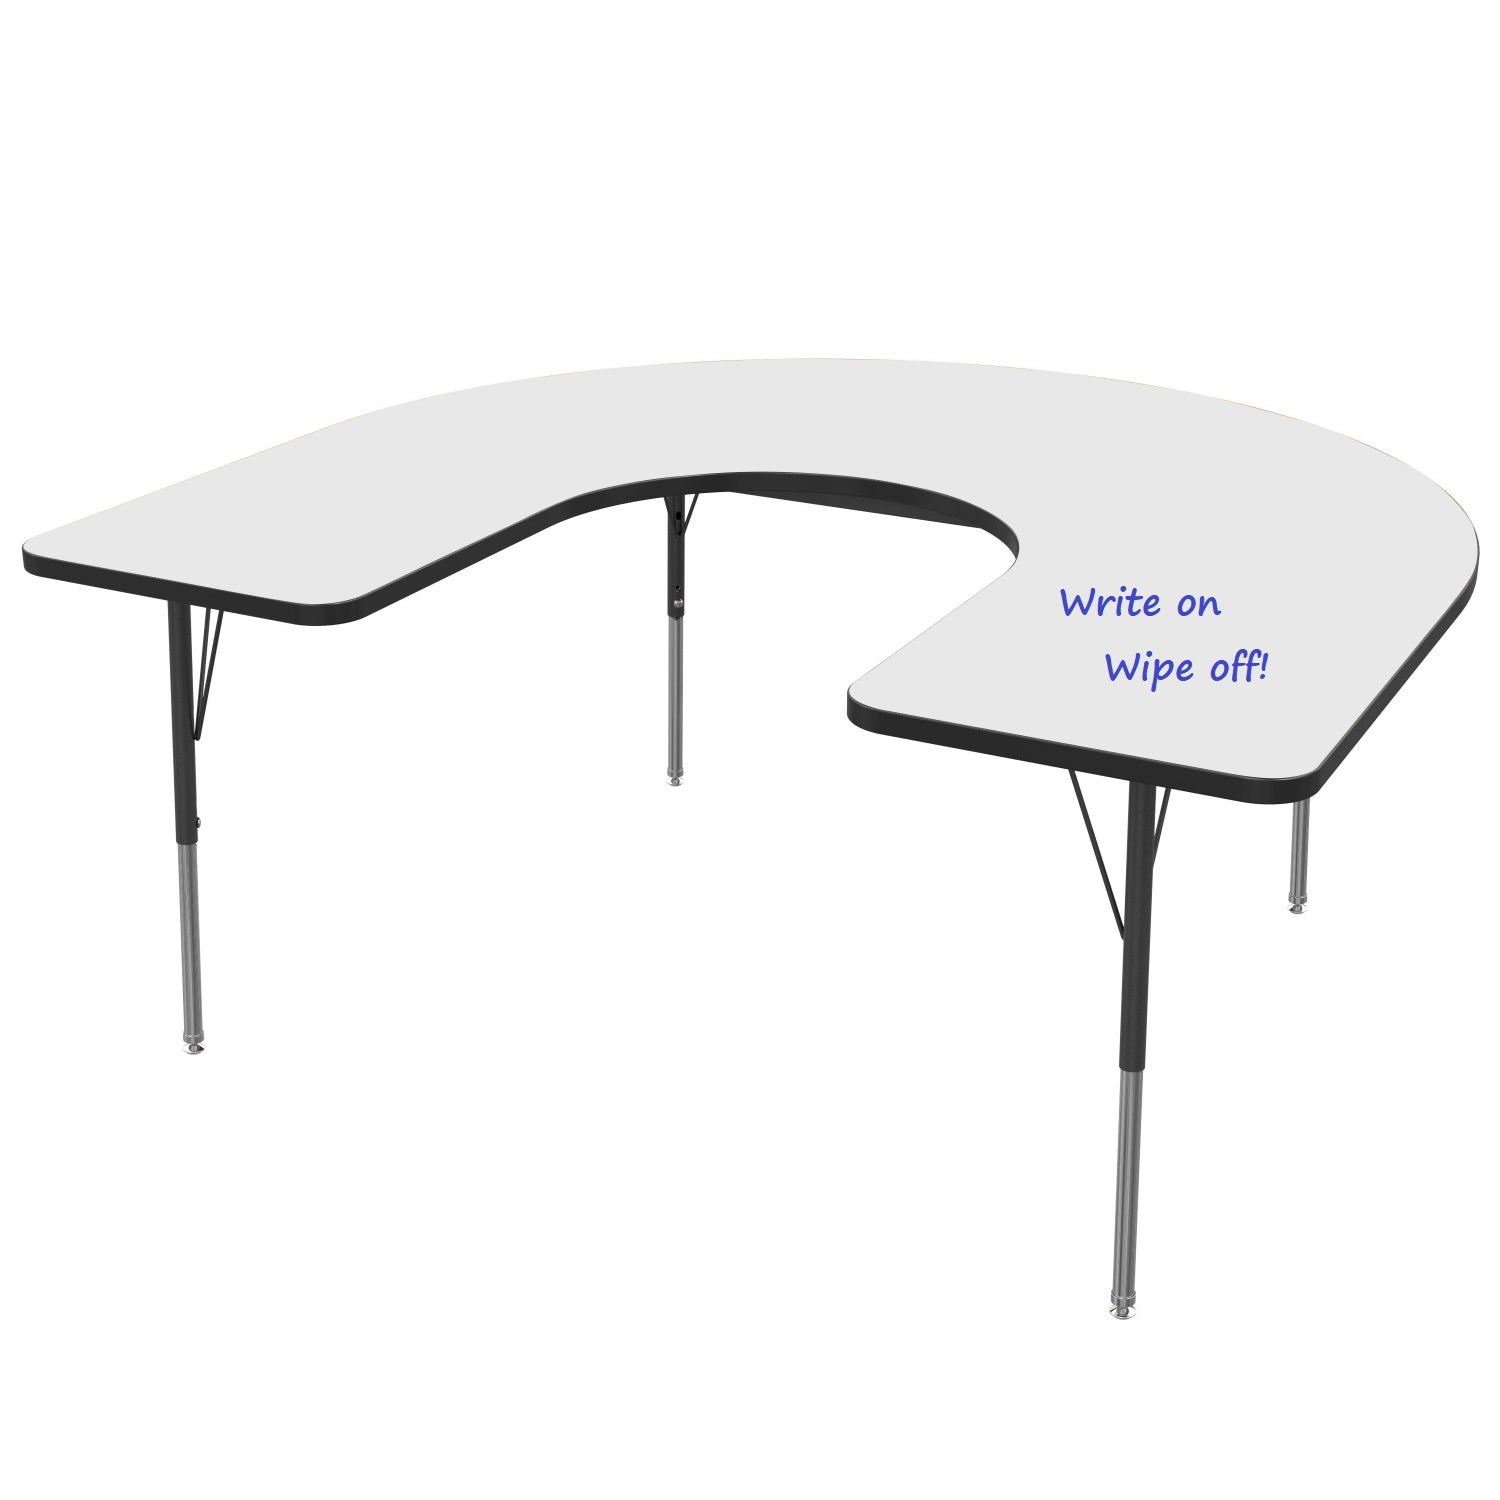 MG Series Adjustable Height Activity Table with White Dry Erase Markerboard Top, 60" x 66" Horseshoe